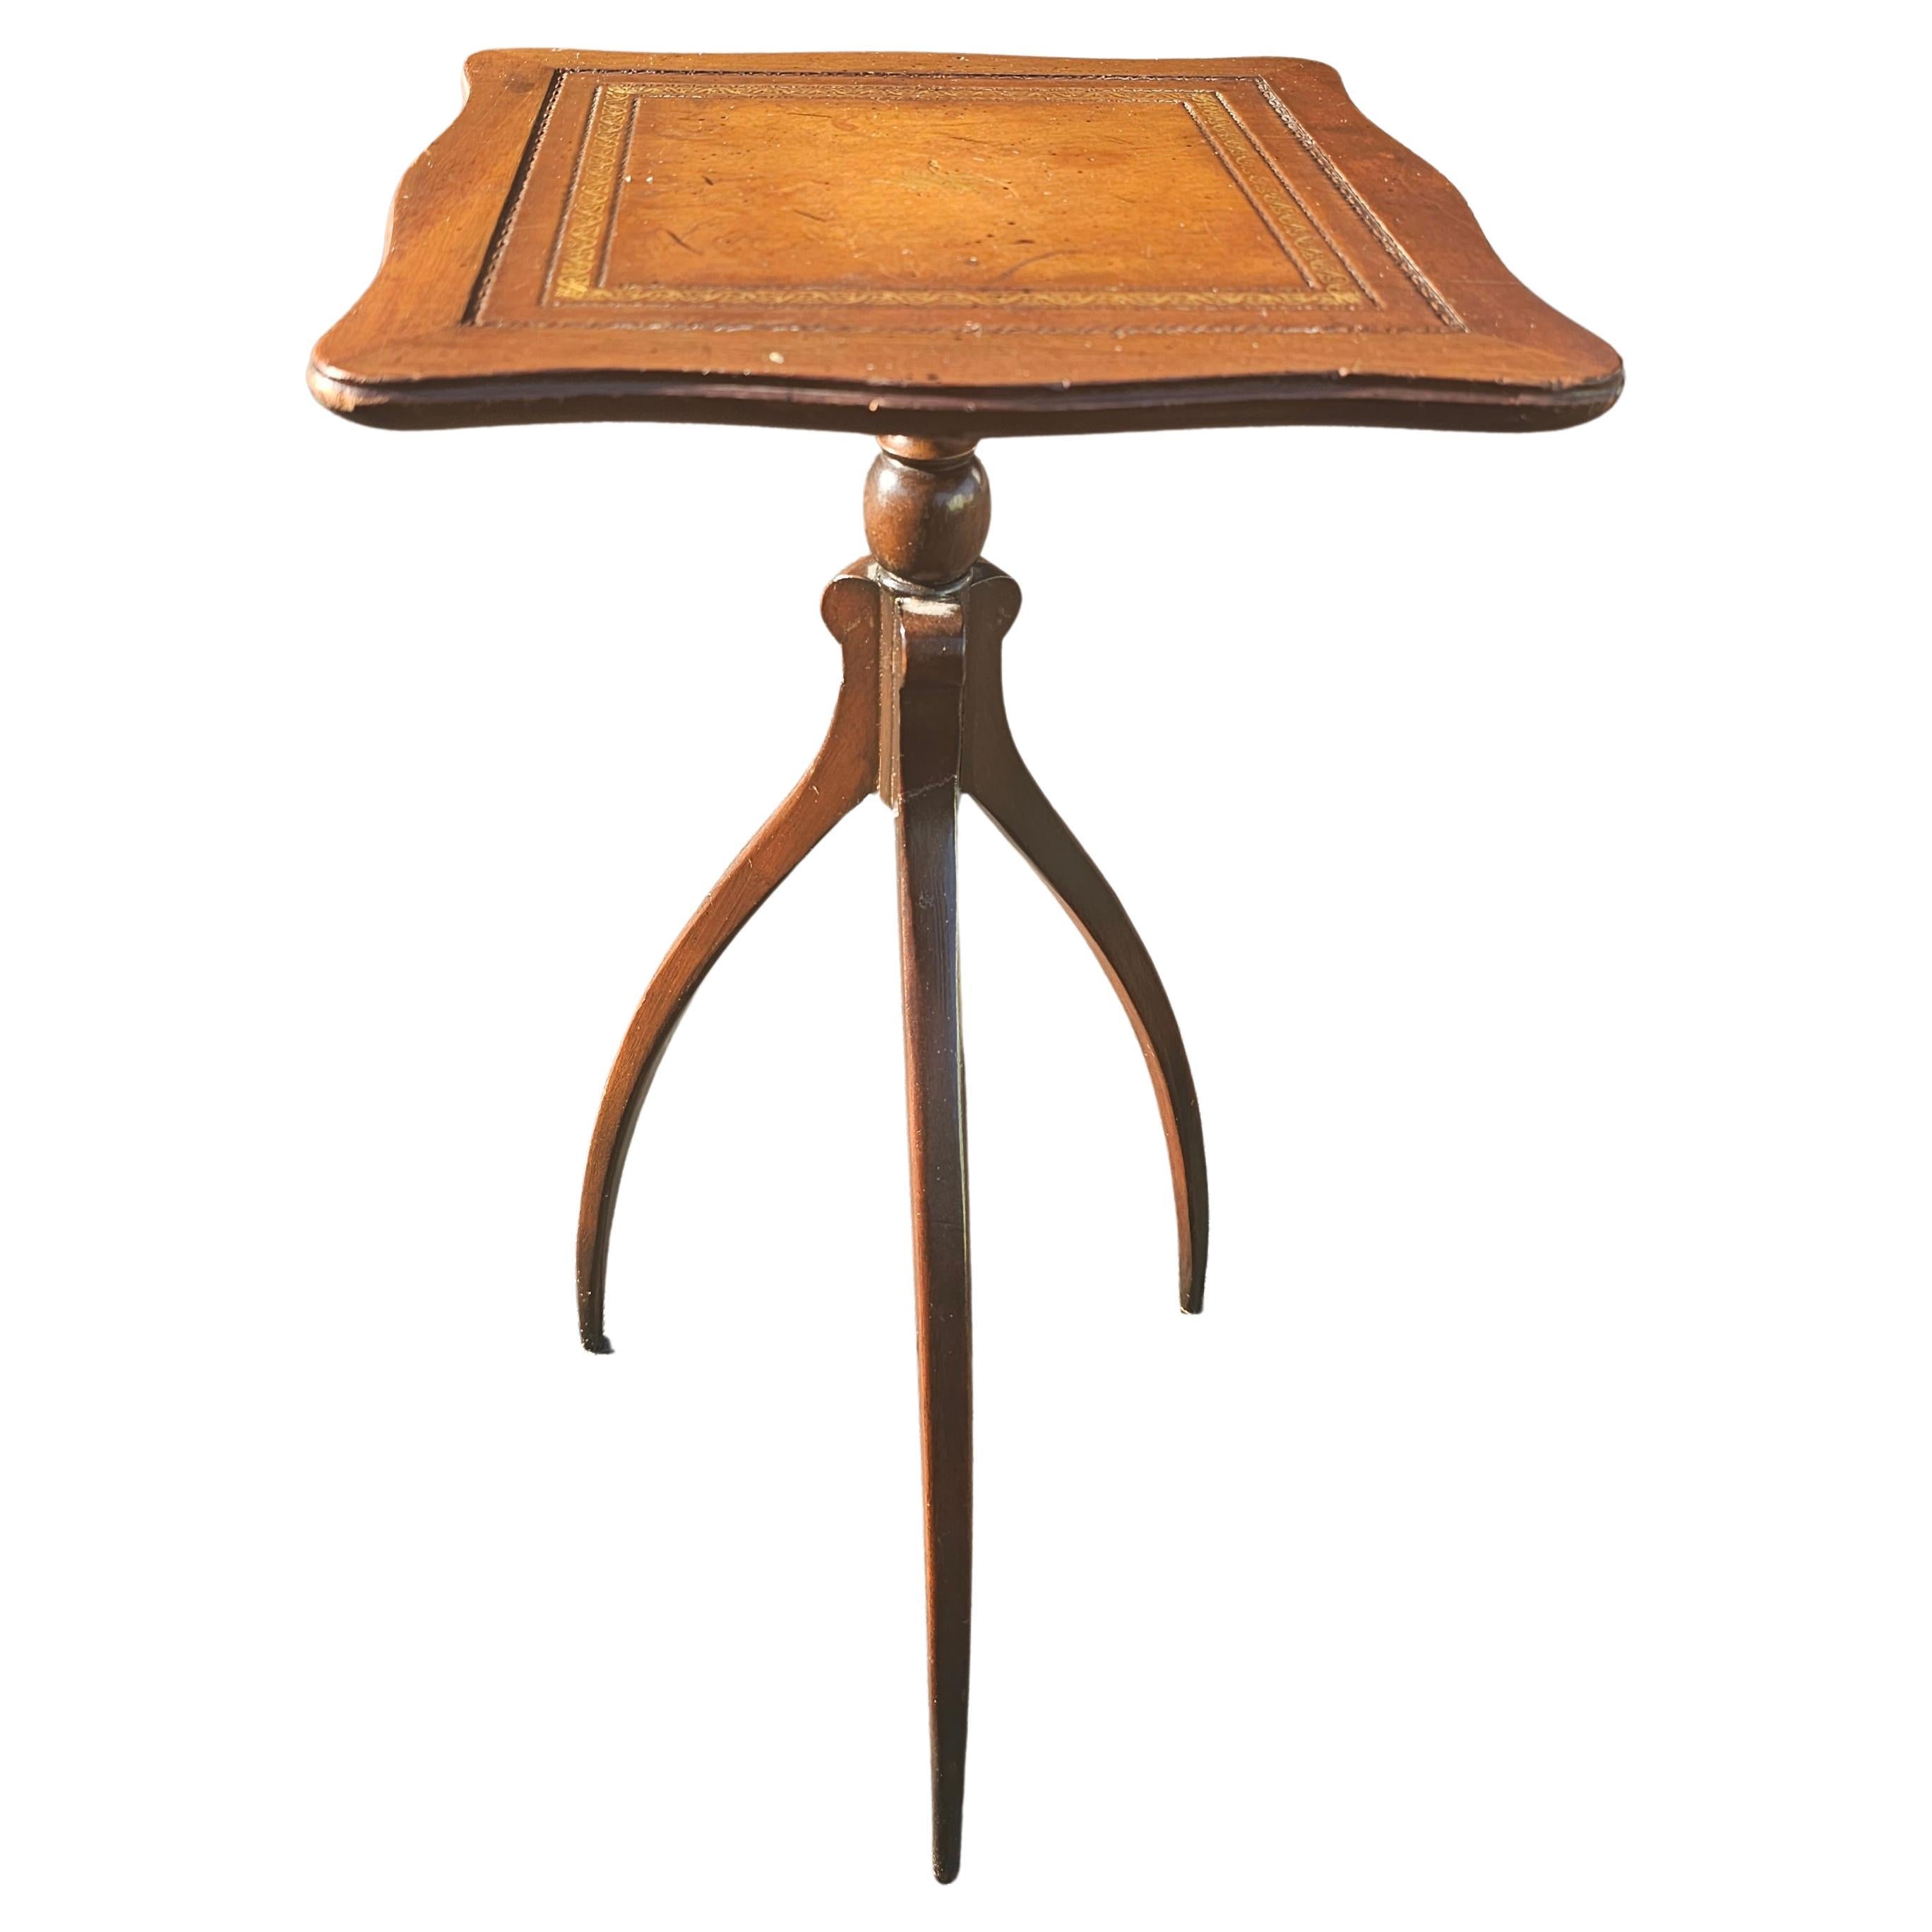 American Mid 20th Century Spider Tripod Mahogany and Tooled Leather Top Candle Stand For Sale